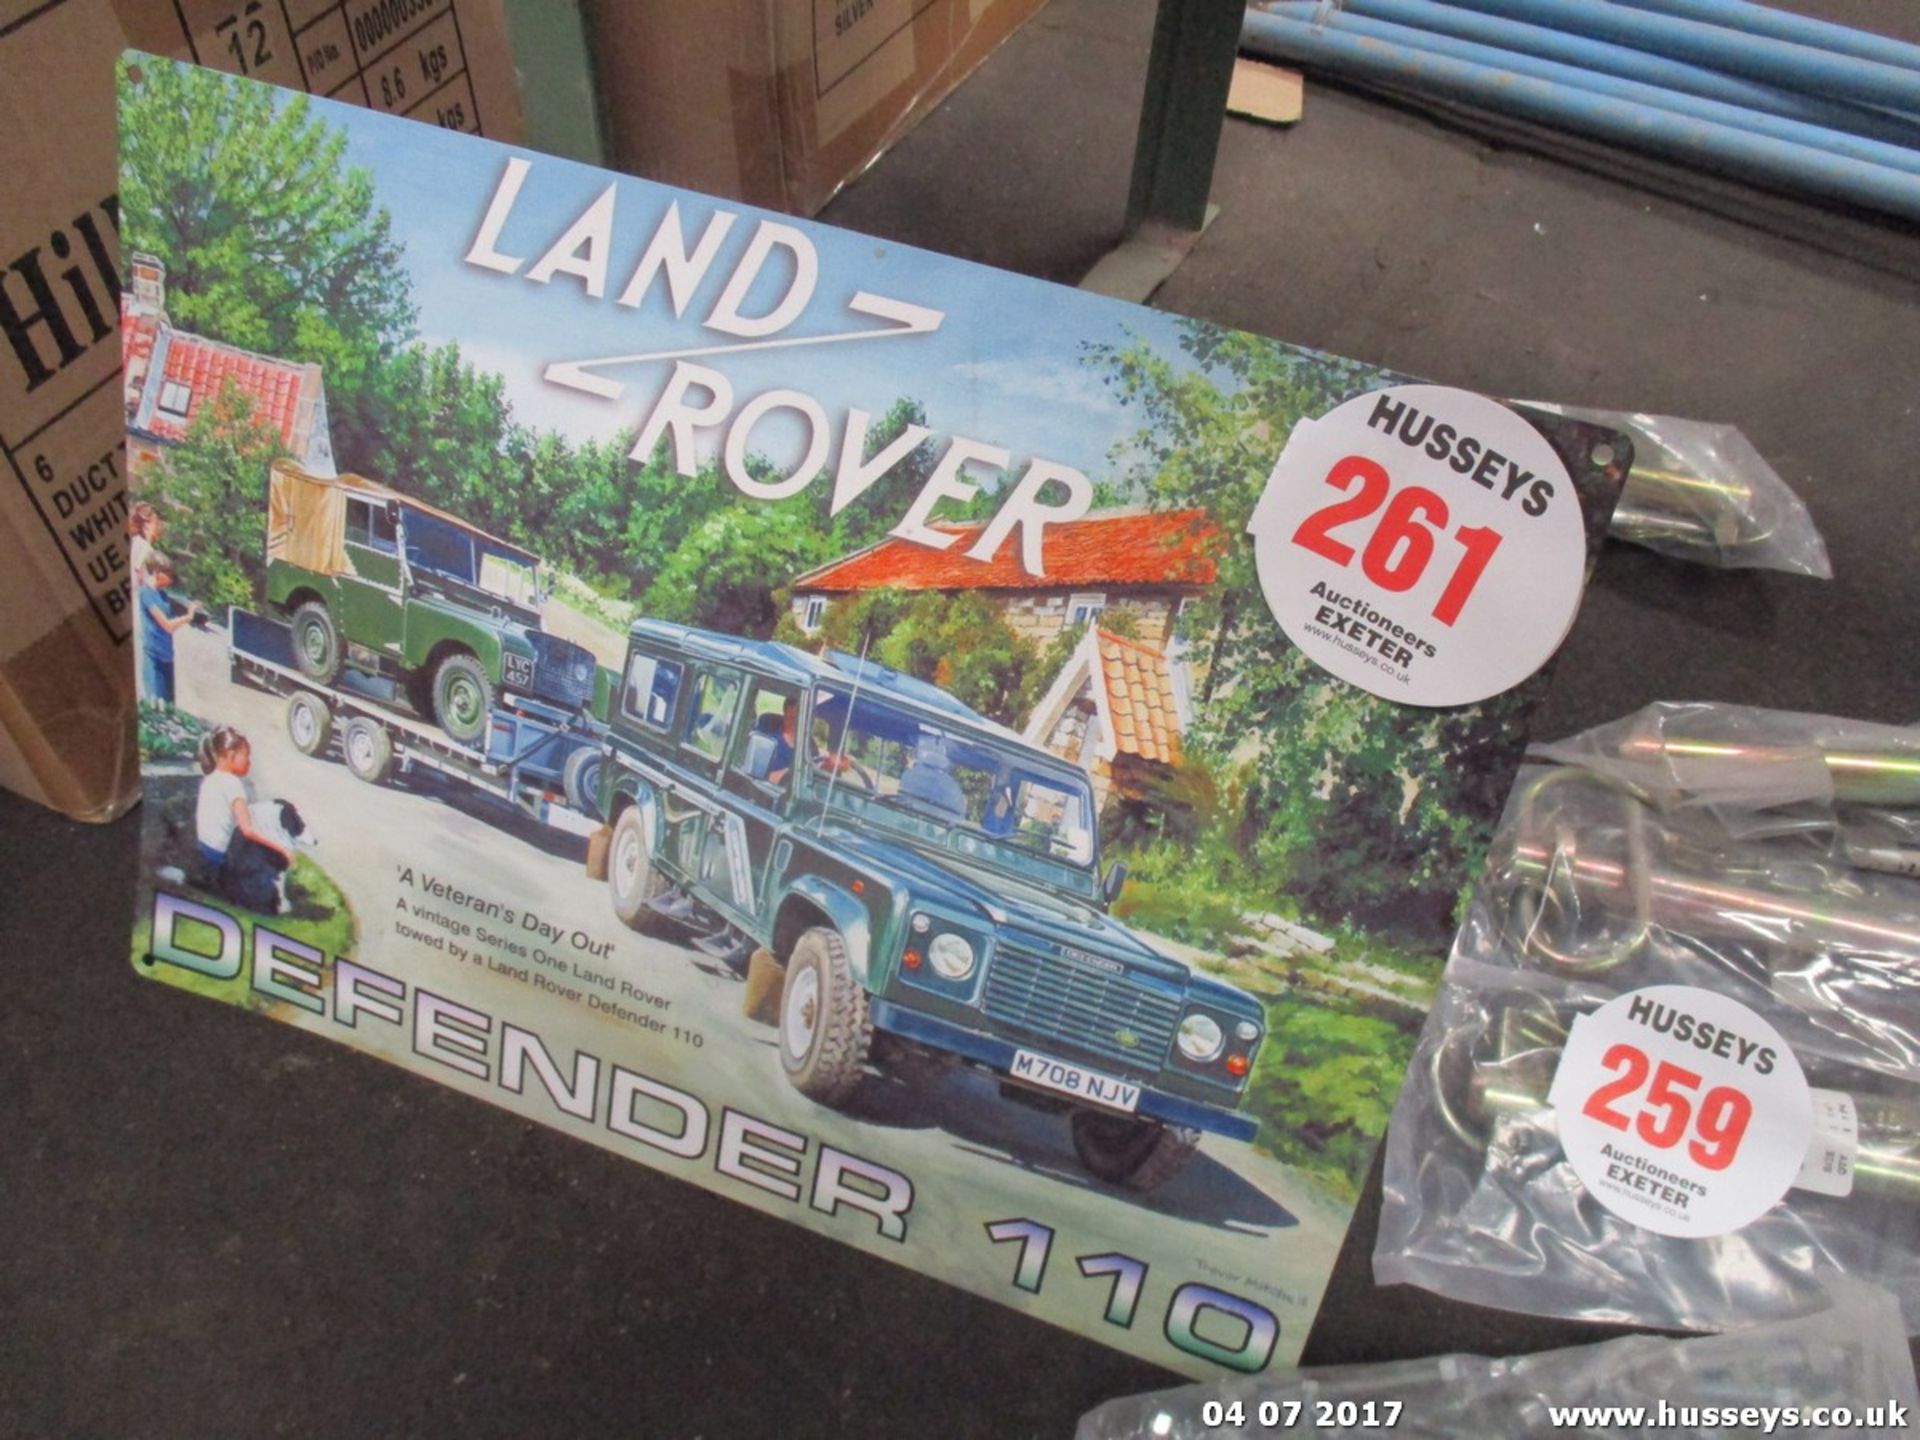 LANDROVER SIGN